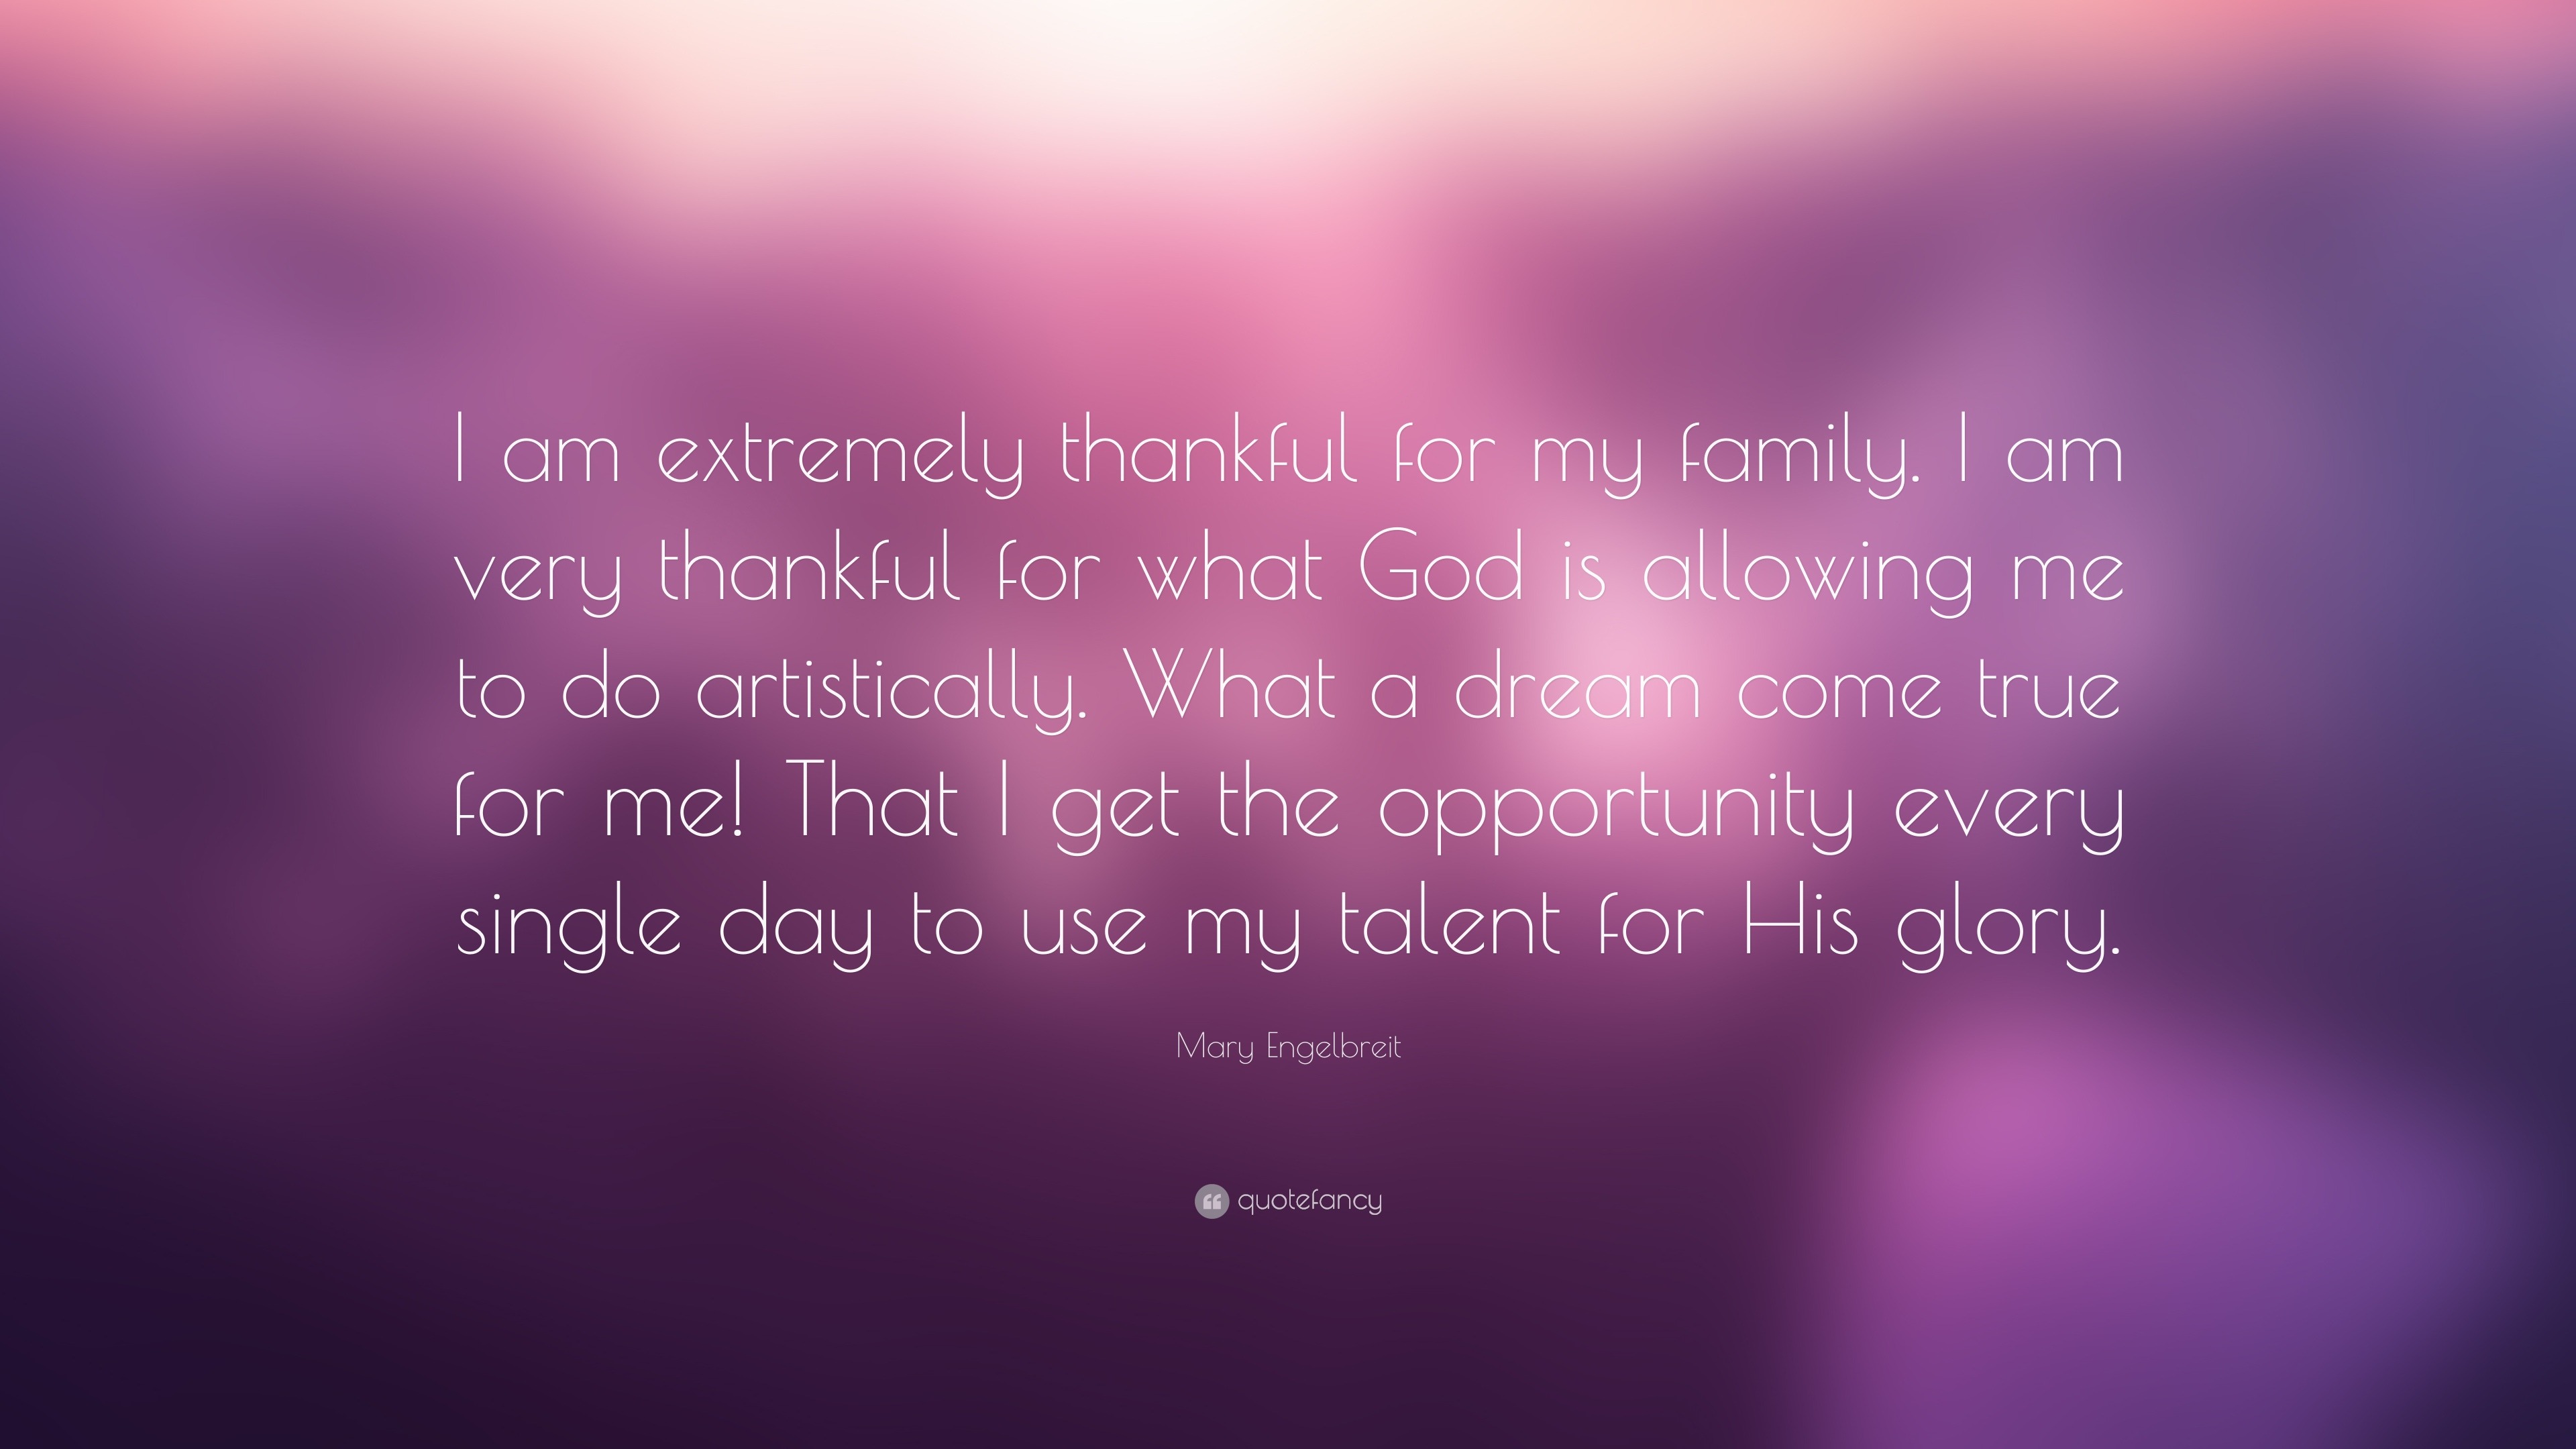 Mary Engelbreit Quote: “I am extremely thankful for my family. I